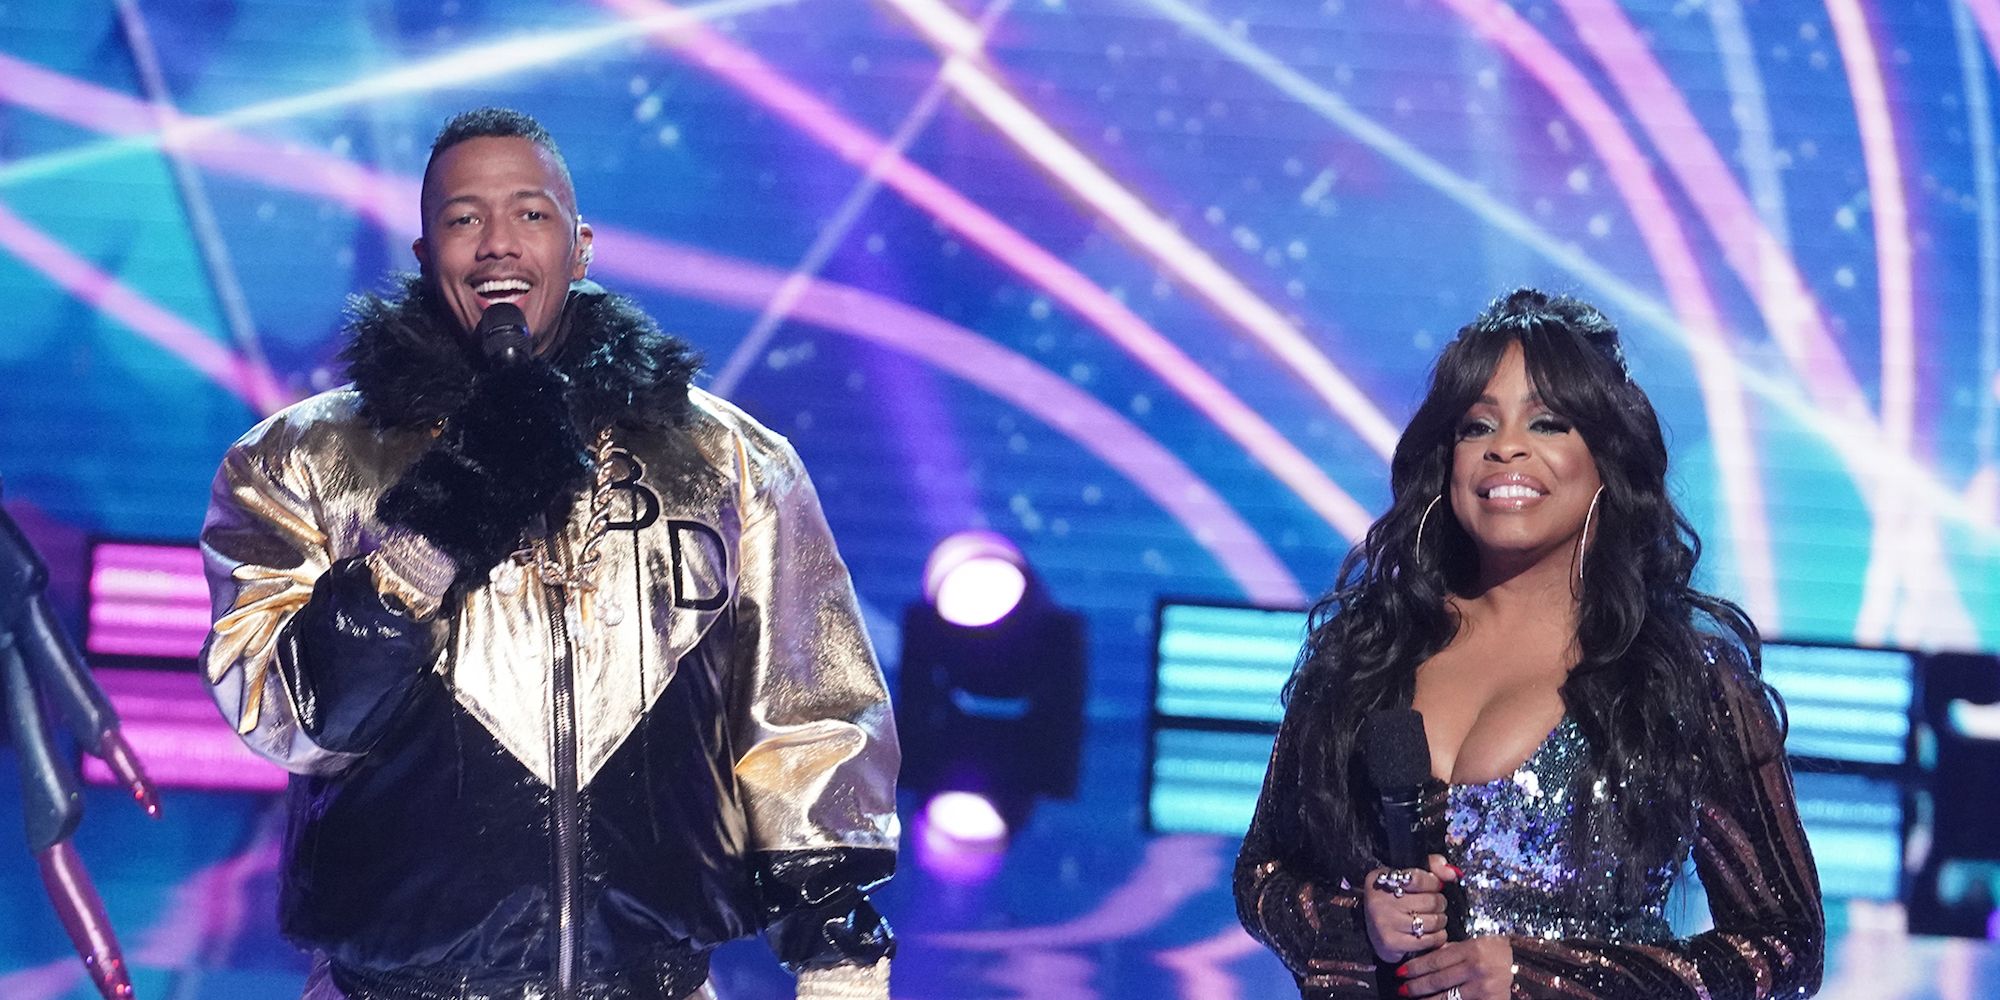 The-Masked-Singer-Nick-Cannon-and-Niecy-